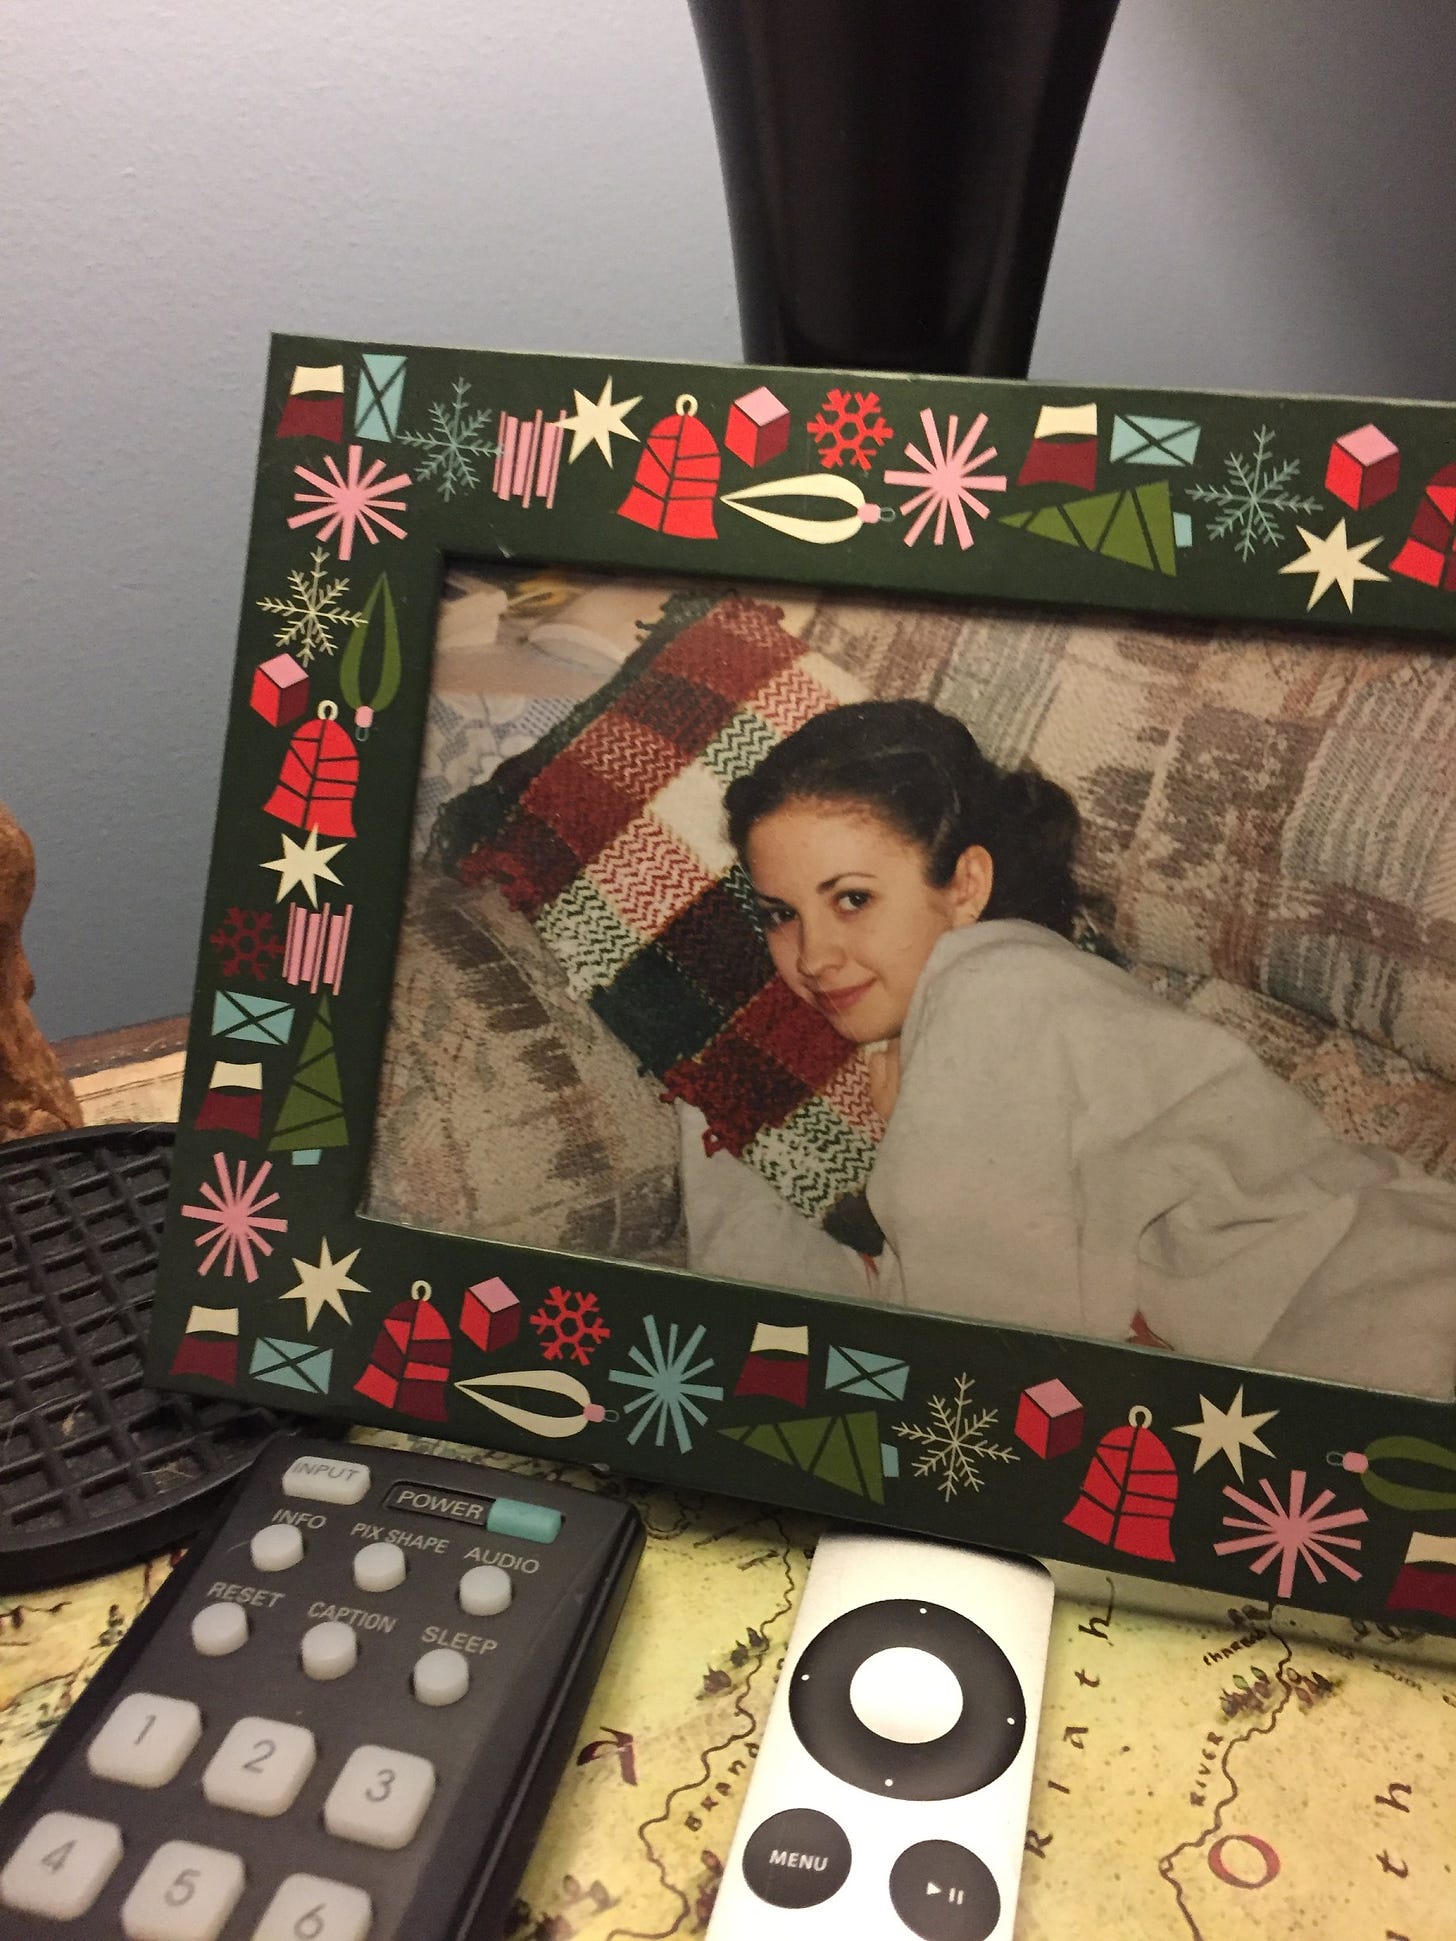 It's endearing that Noah puts this photo of me as a 14-year-old out on his nightstand every year.